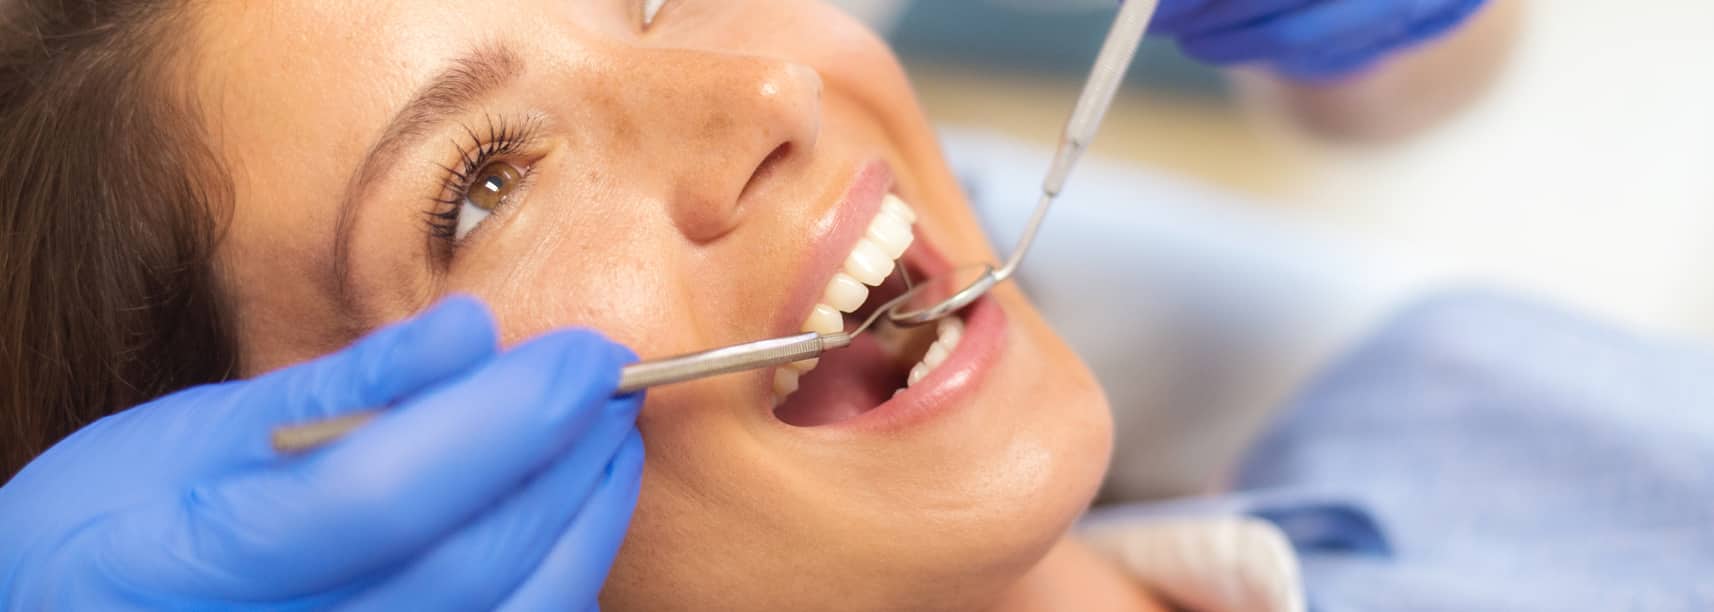 woman at the dentist getting teeth checked and fluoride treatment